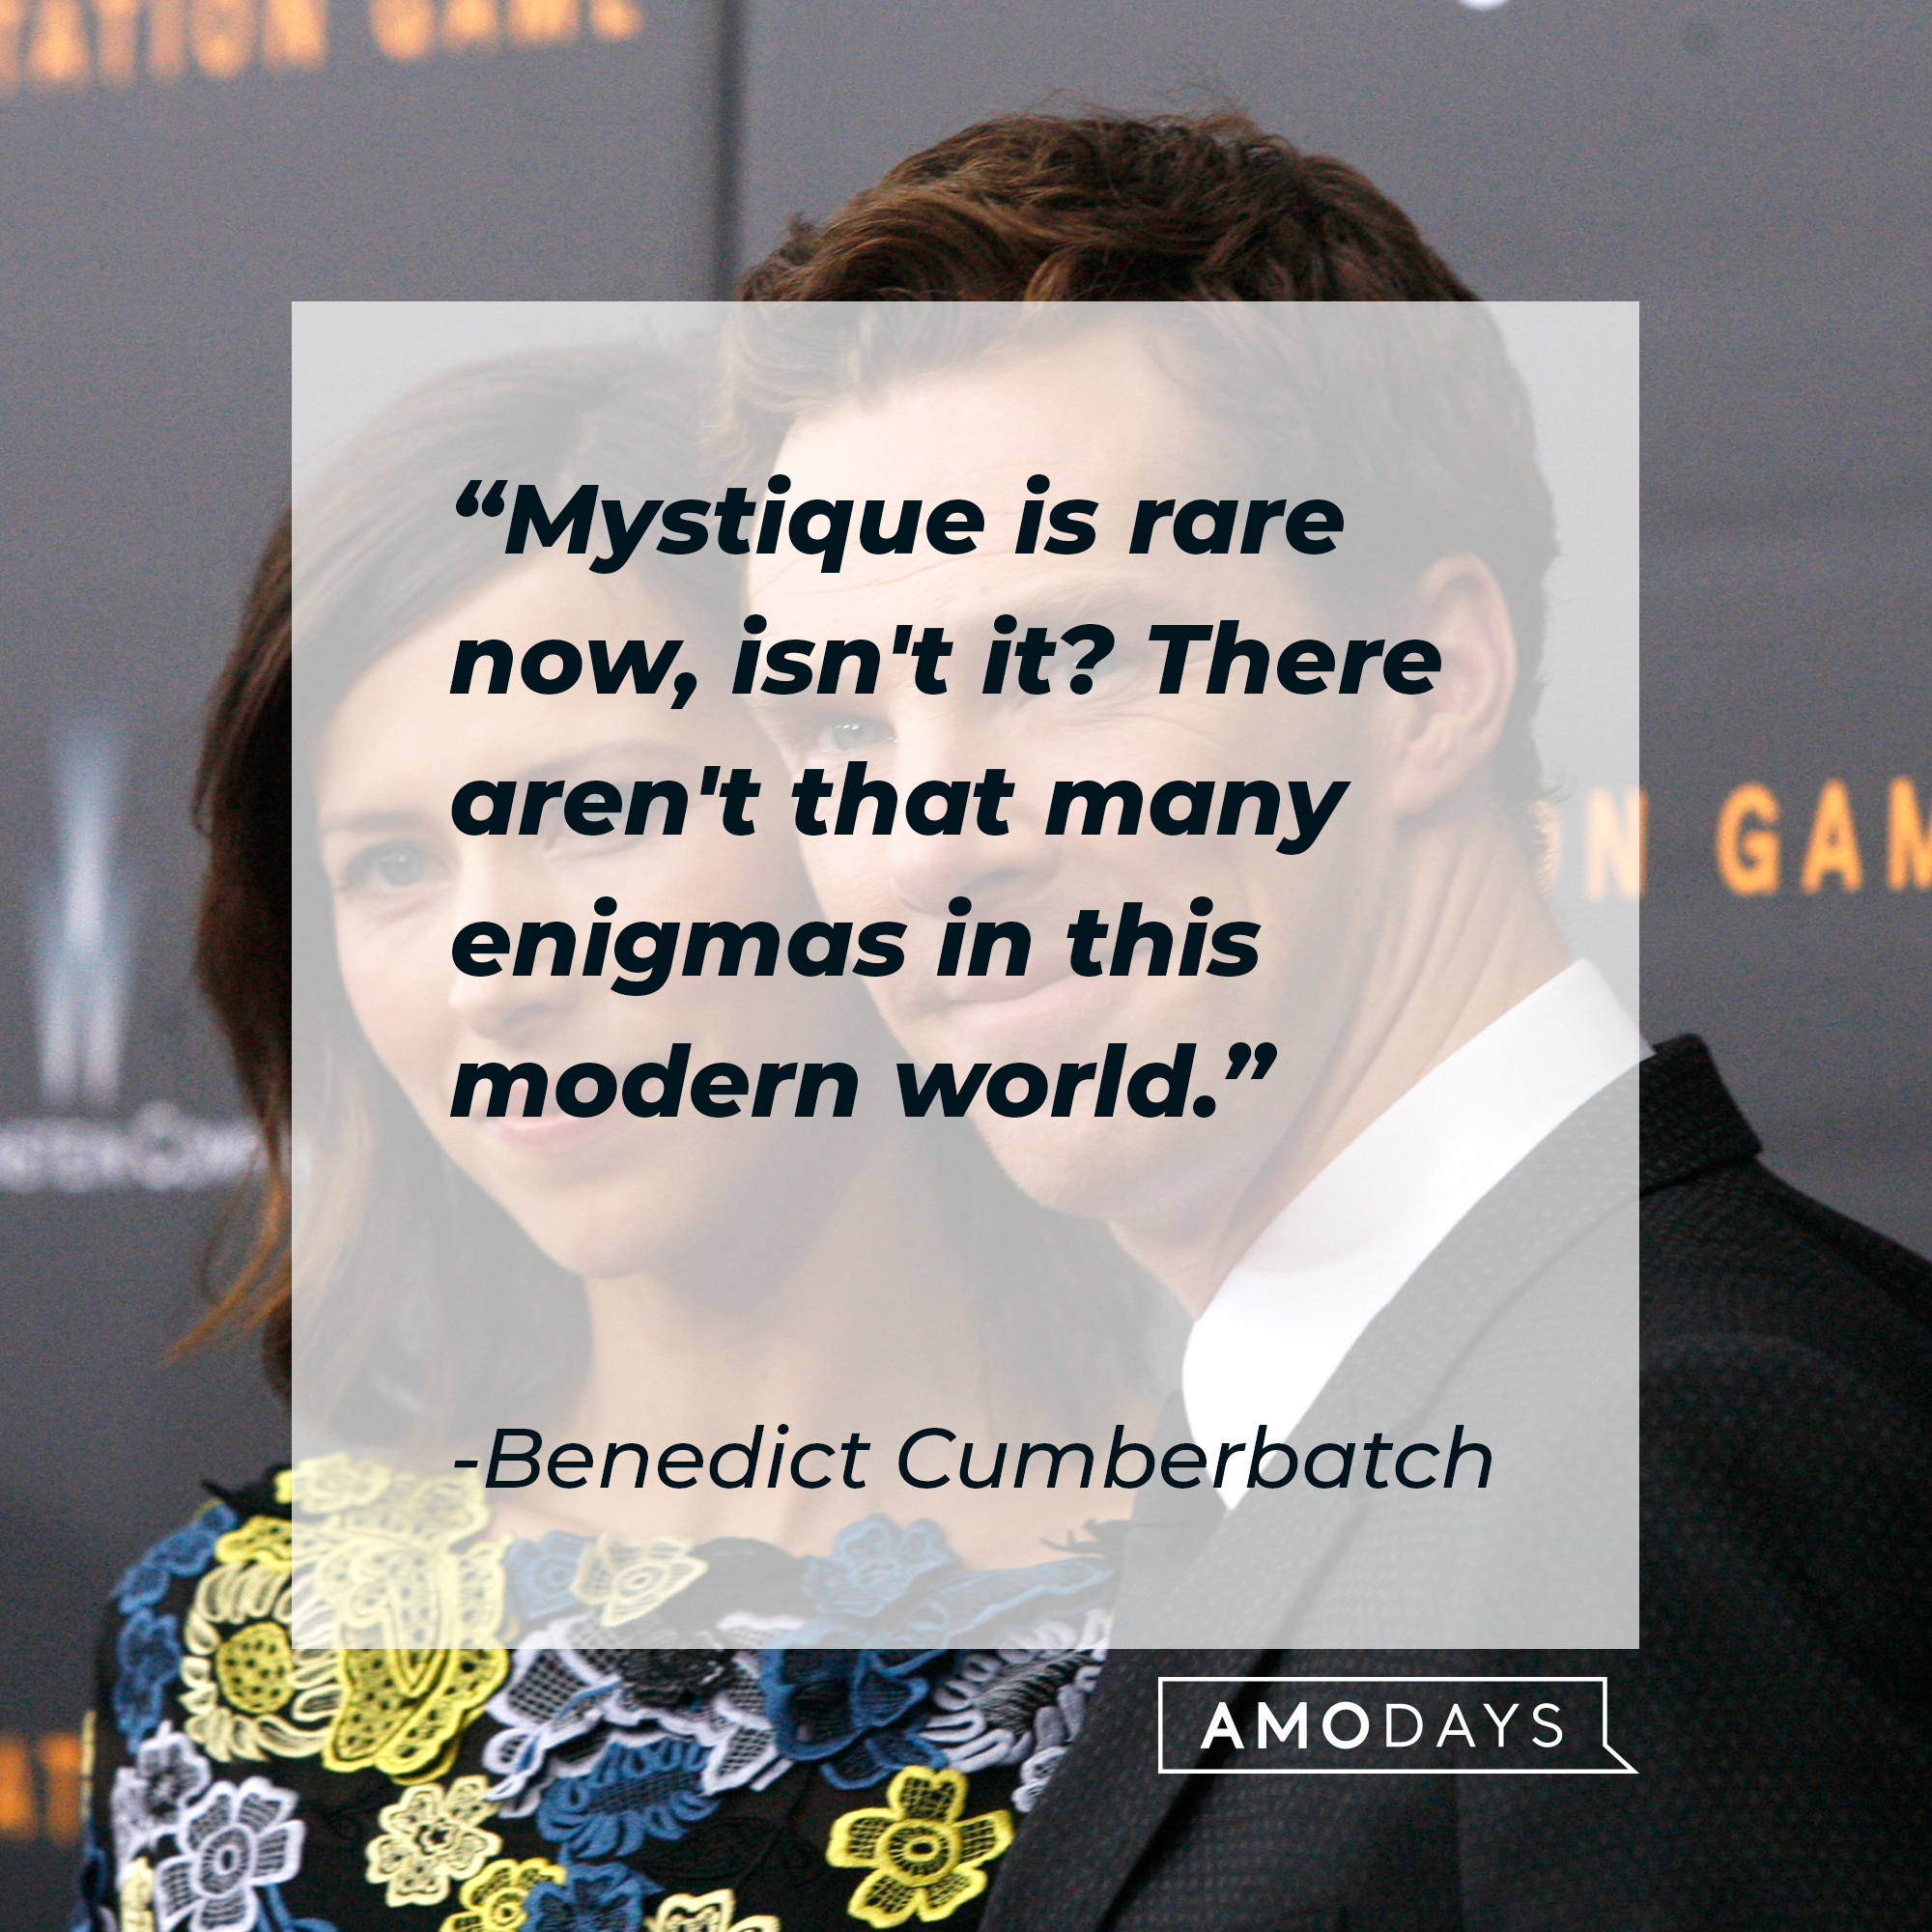 Benedict Cumberbatch, with his quote::  “Mystique is rare now, isn't it? There aren't that many enigmas in this modern world.” | Source: Getty Images